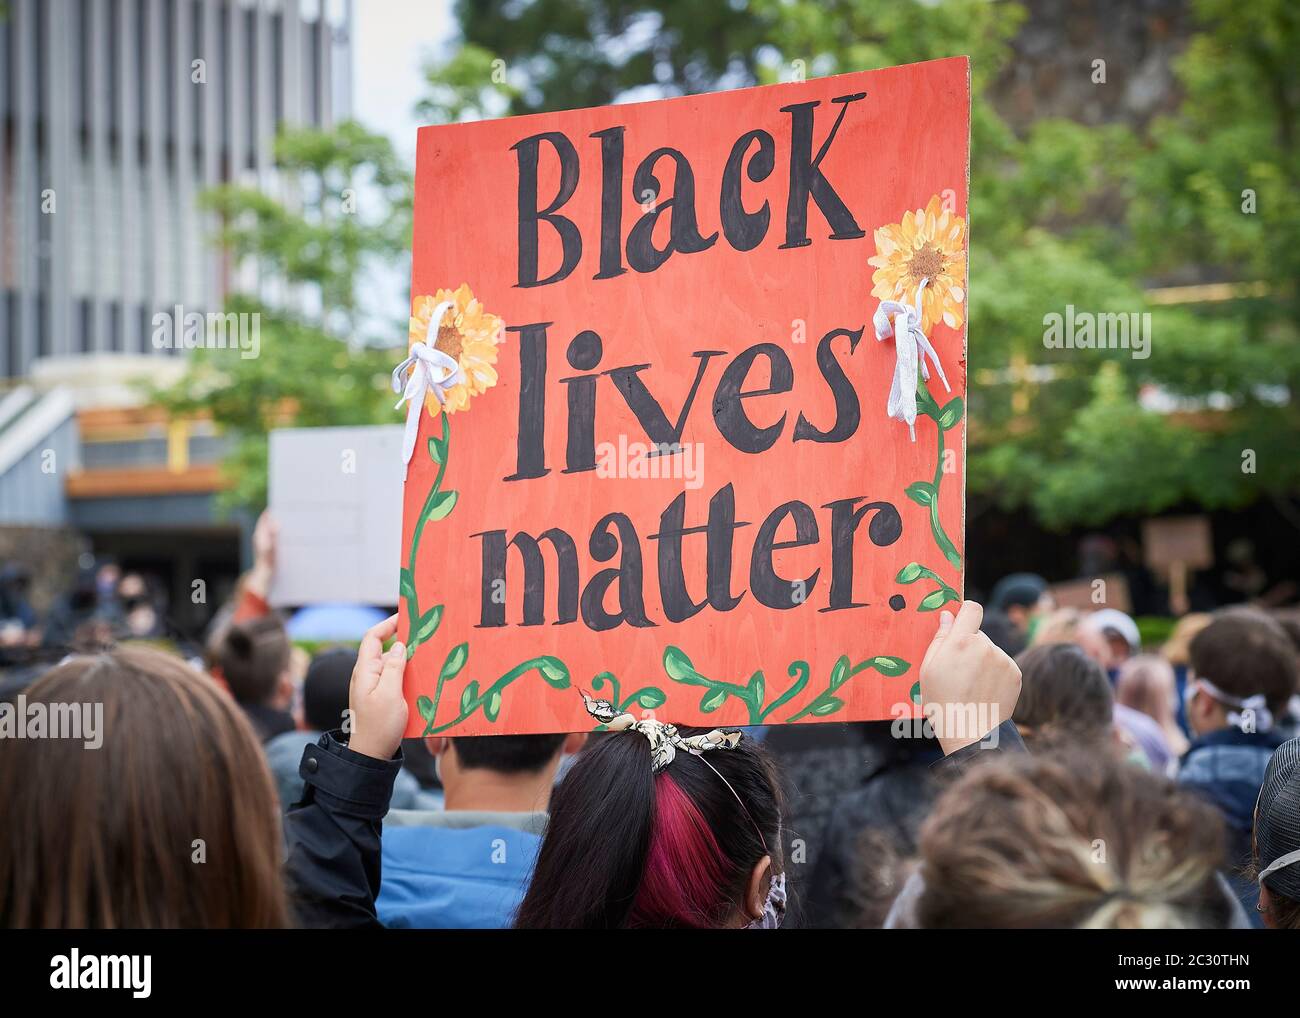 Many carrying signs, people participate in a June 7, 2020, Black Lives Matter protest in Eugene, Oregon. Stock Photo